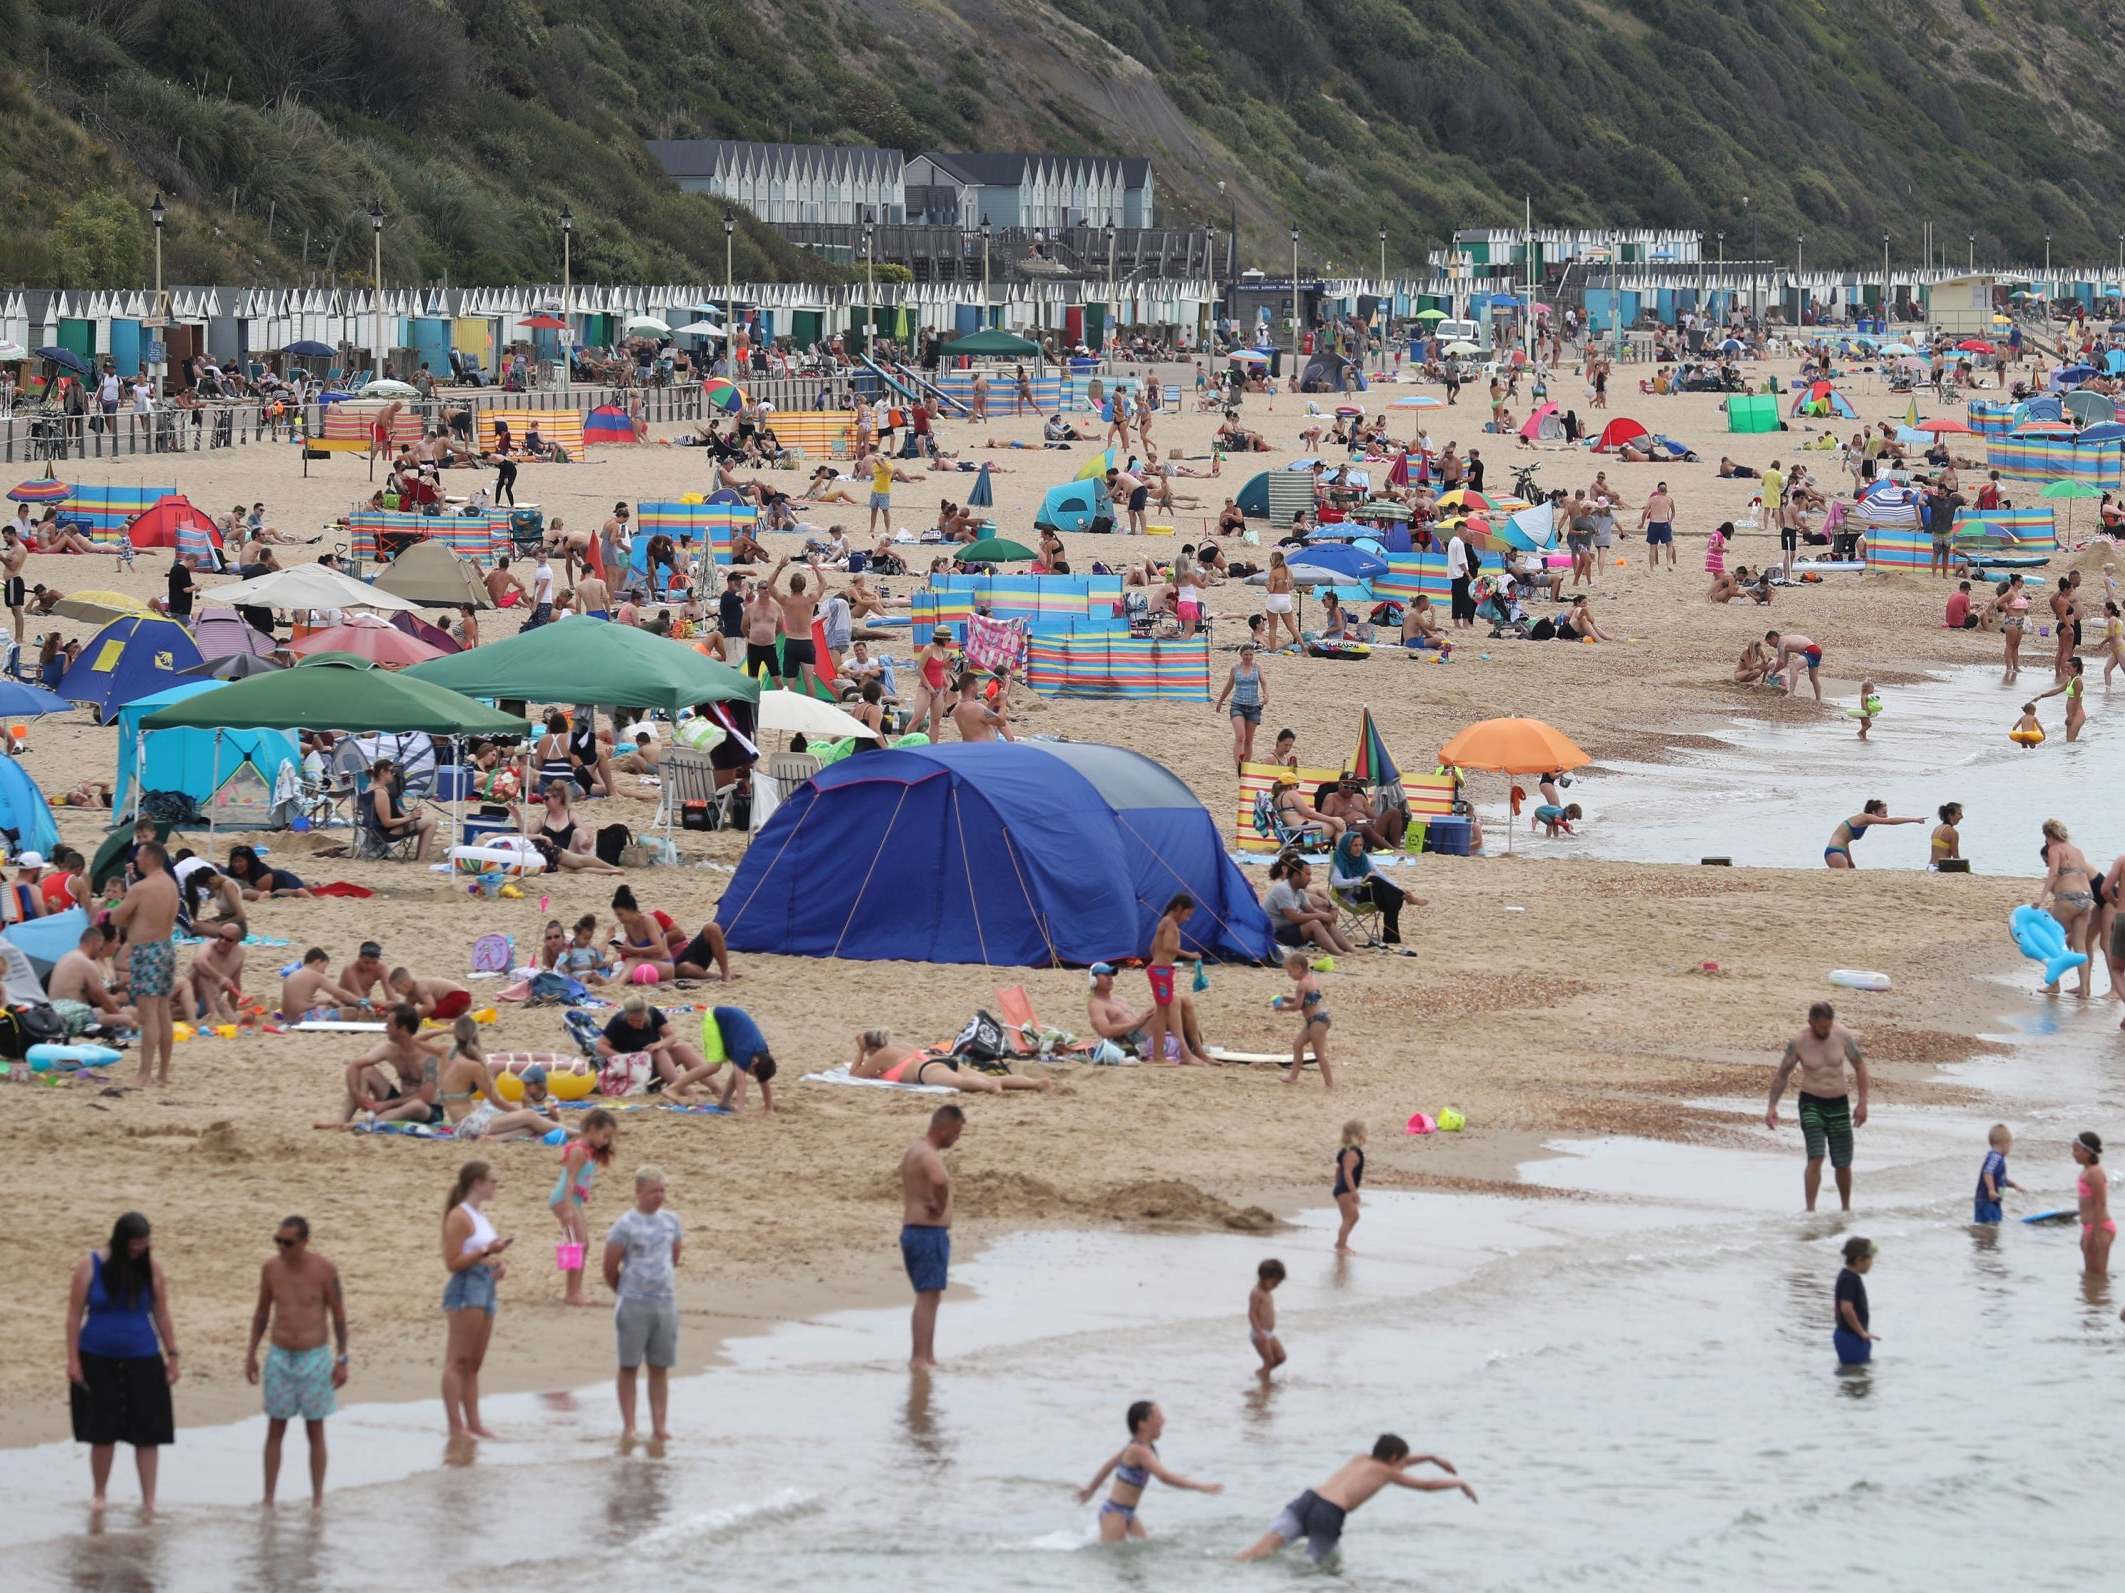 People enjoy the hot weather at Boscombe beach in Dorset